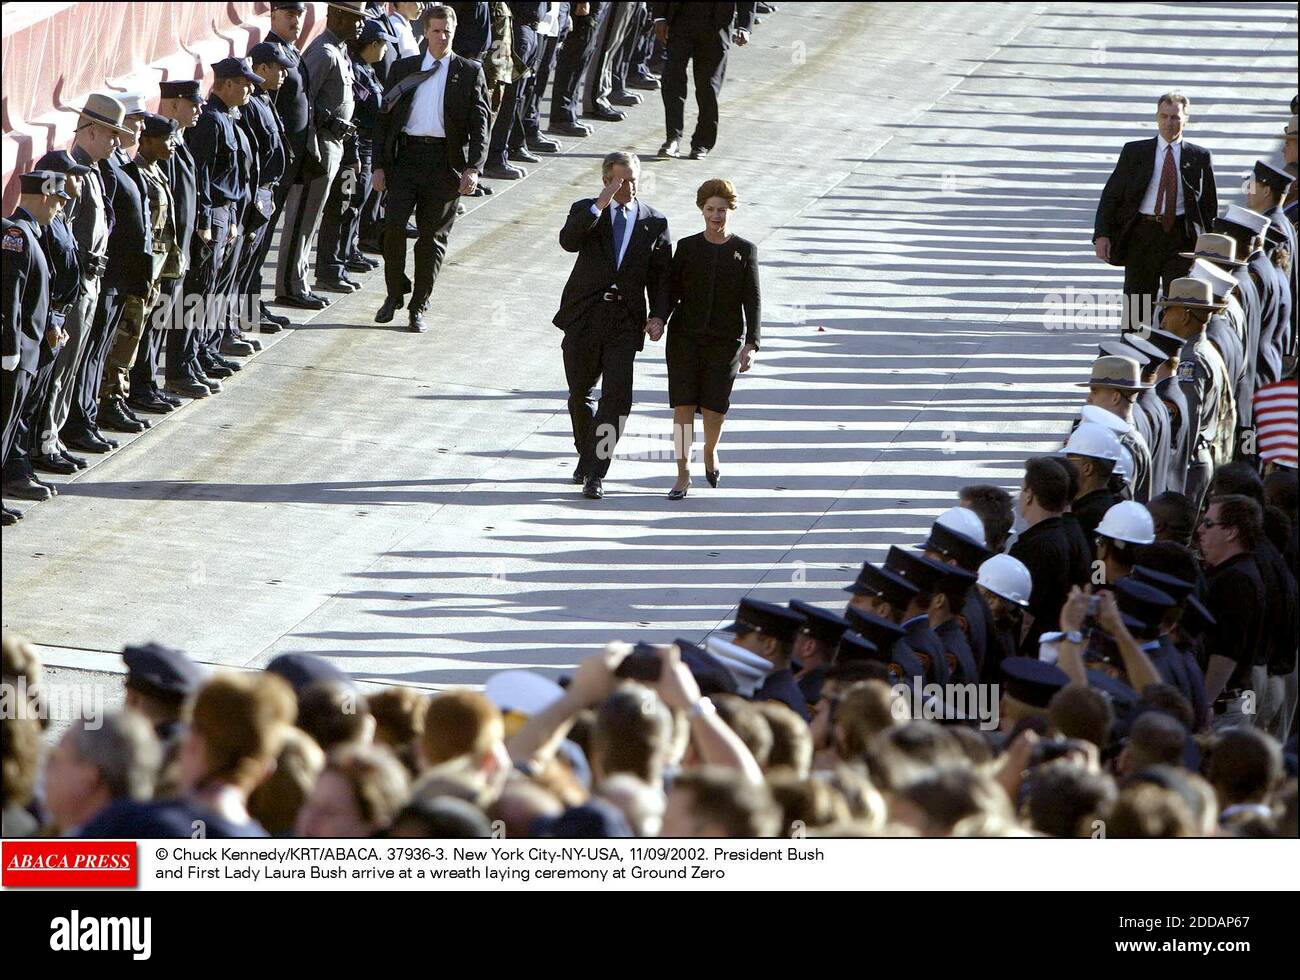 NO FILM, NO VIDEO, NO TV, NO DOCUMENTARY - © Chuck Kennedy/KRT/ABACA. 37936-3. New York City-NY-USA, 11/09/2002. President Bush and First Lady Laura Bush arrive at a wreath laying ceremony at Ground Zero Stock Photo